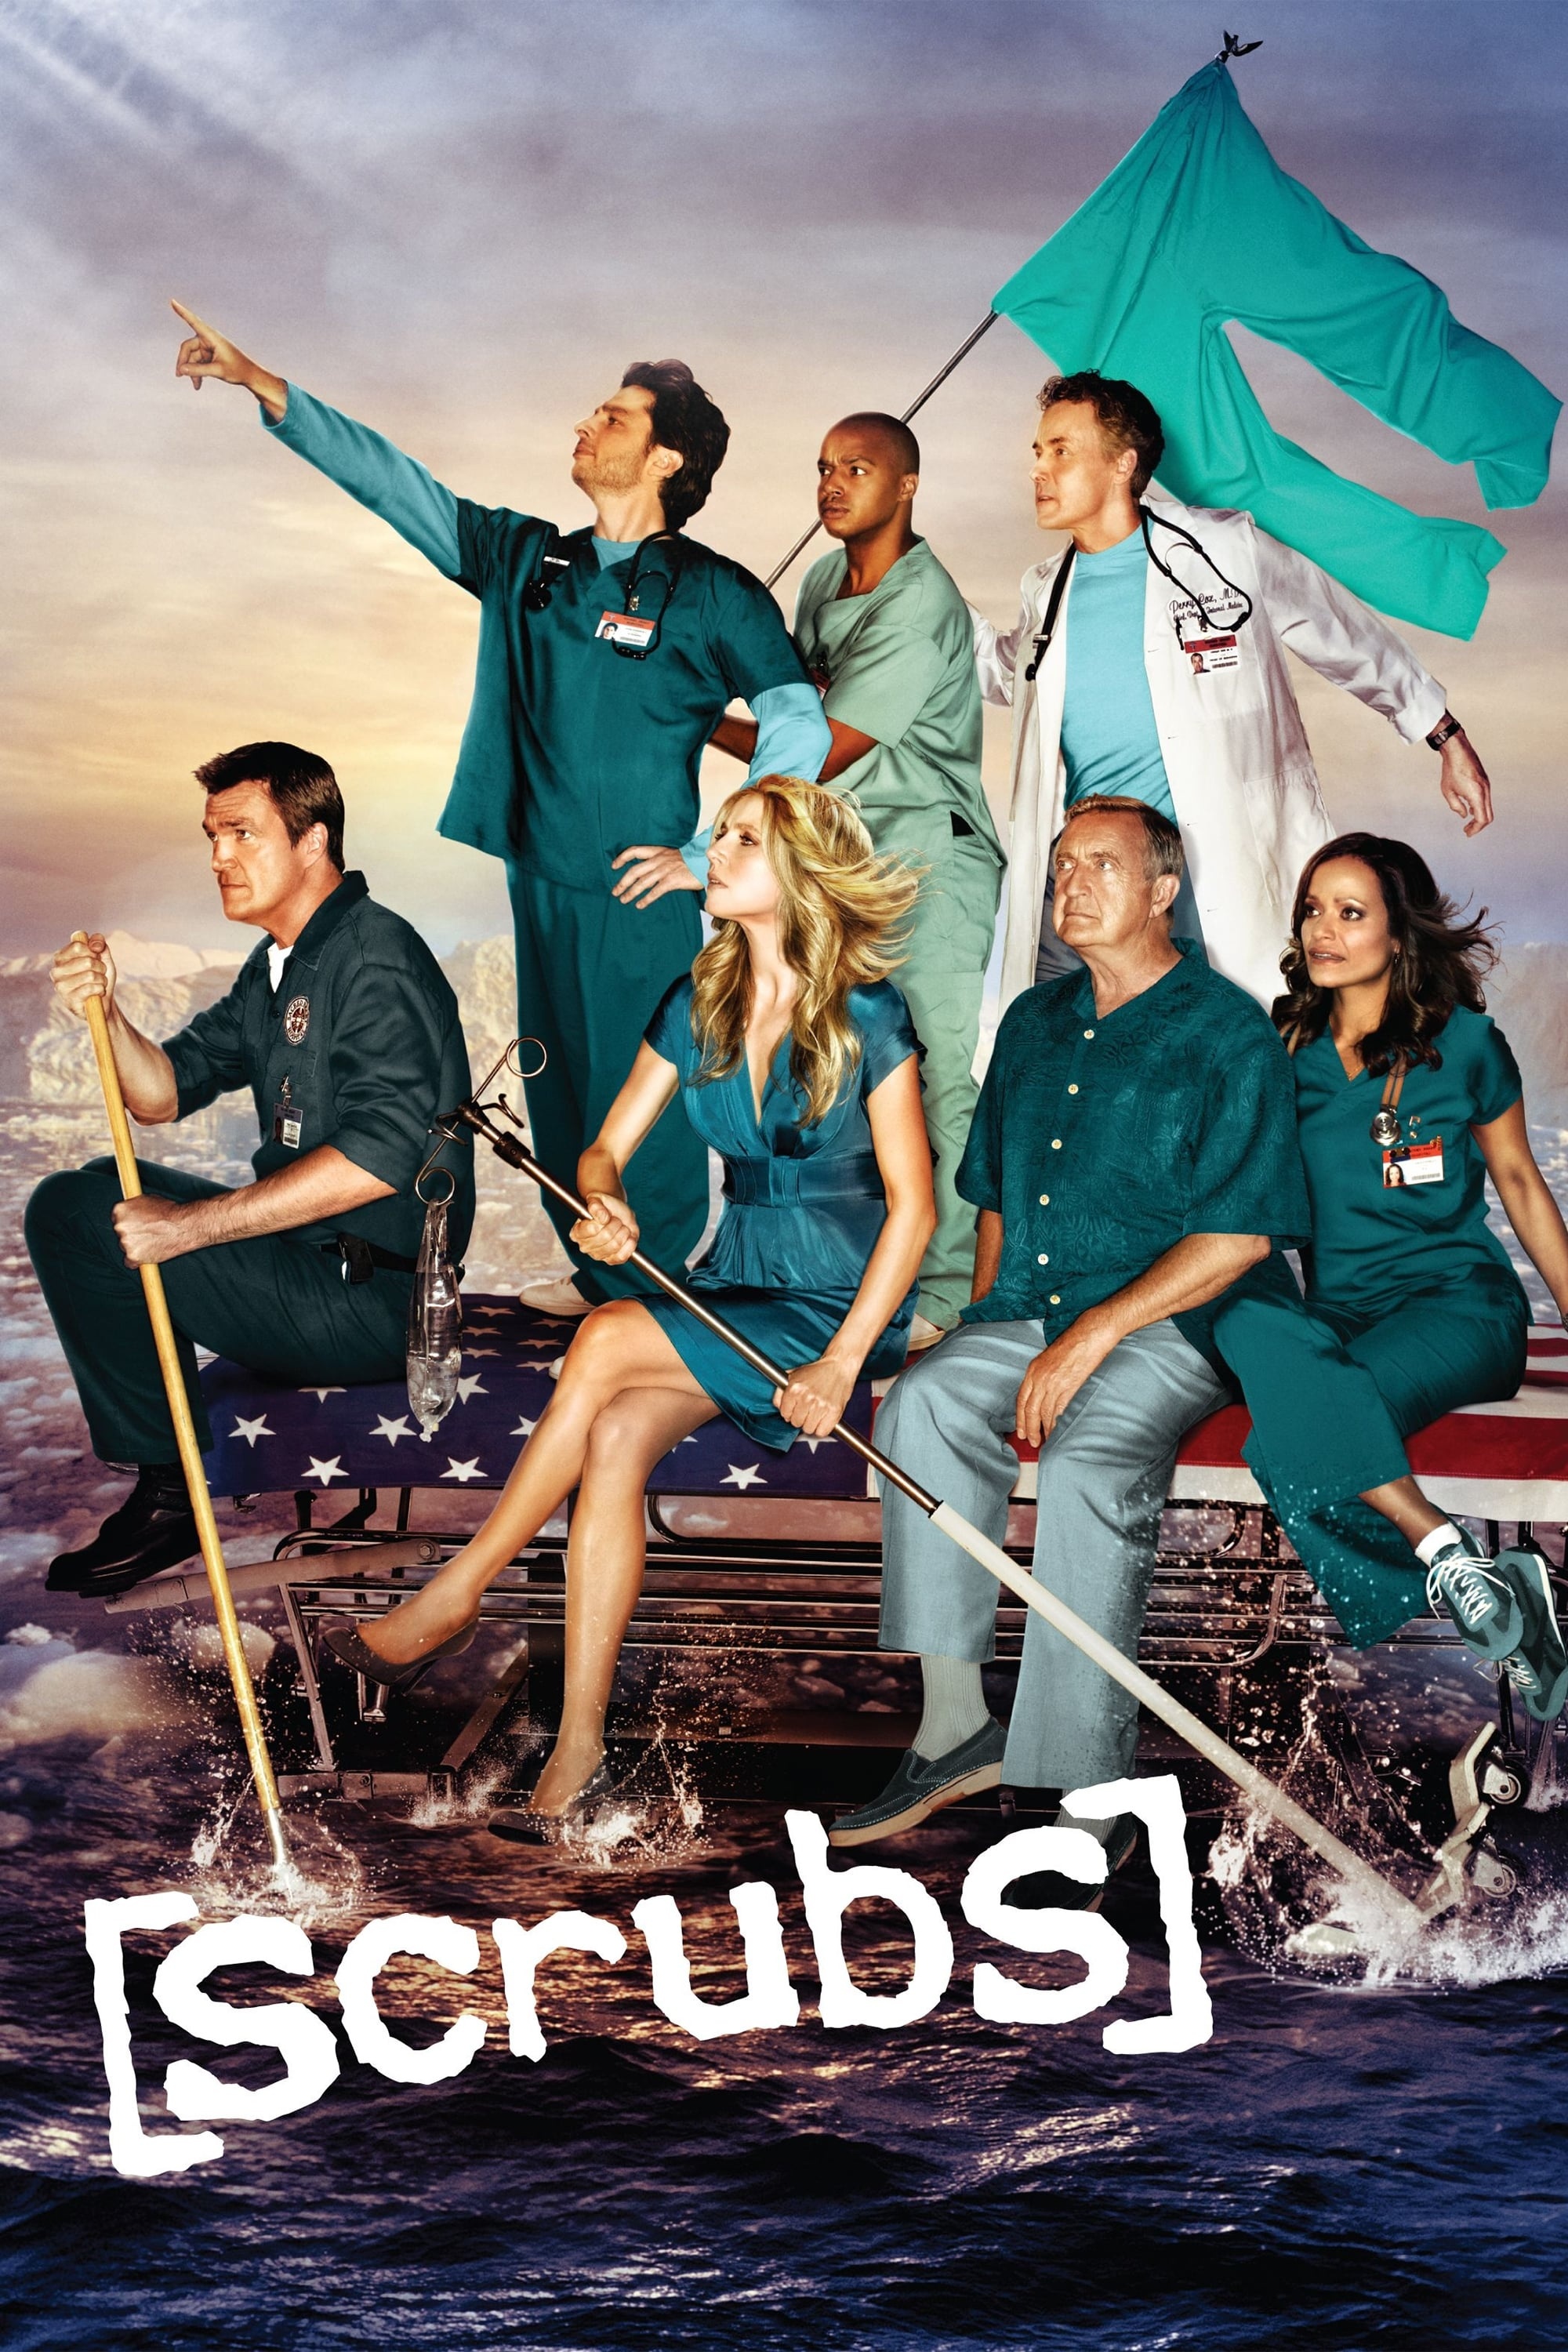 Scrubs (TV Series): 2001-2010 American medical sitcom television show created by Bill Lawrence. 2000x3000 HD Background.